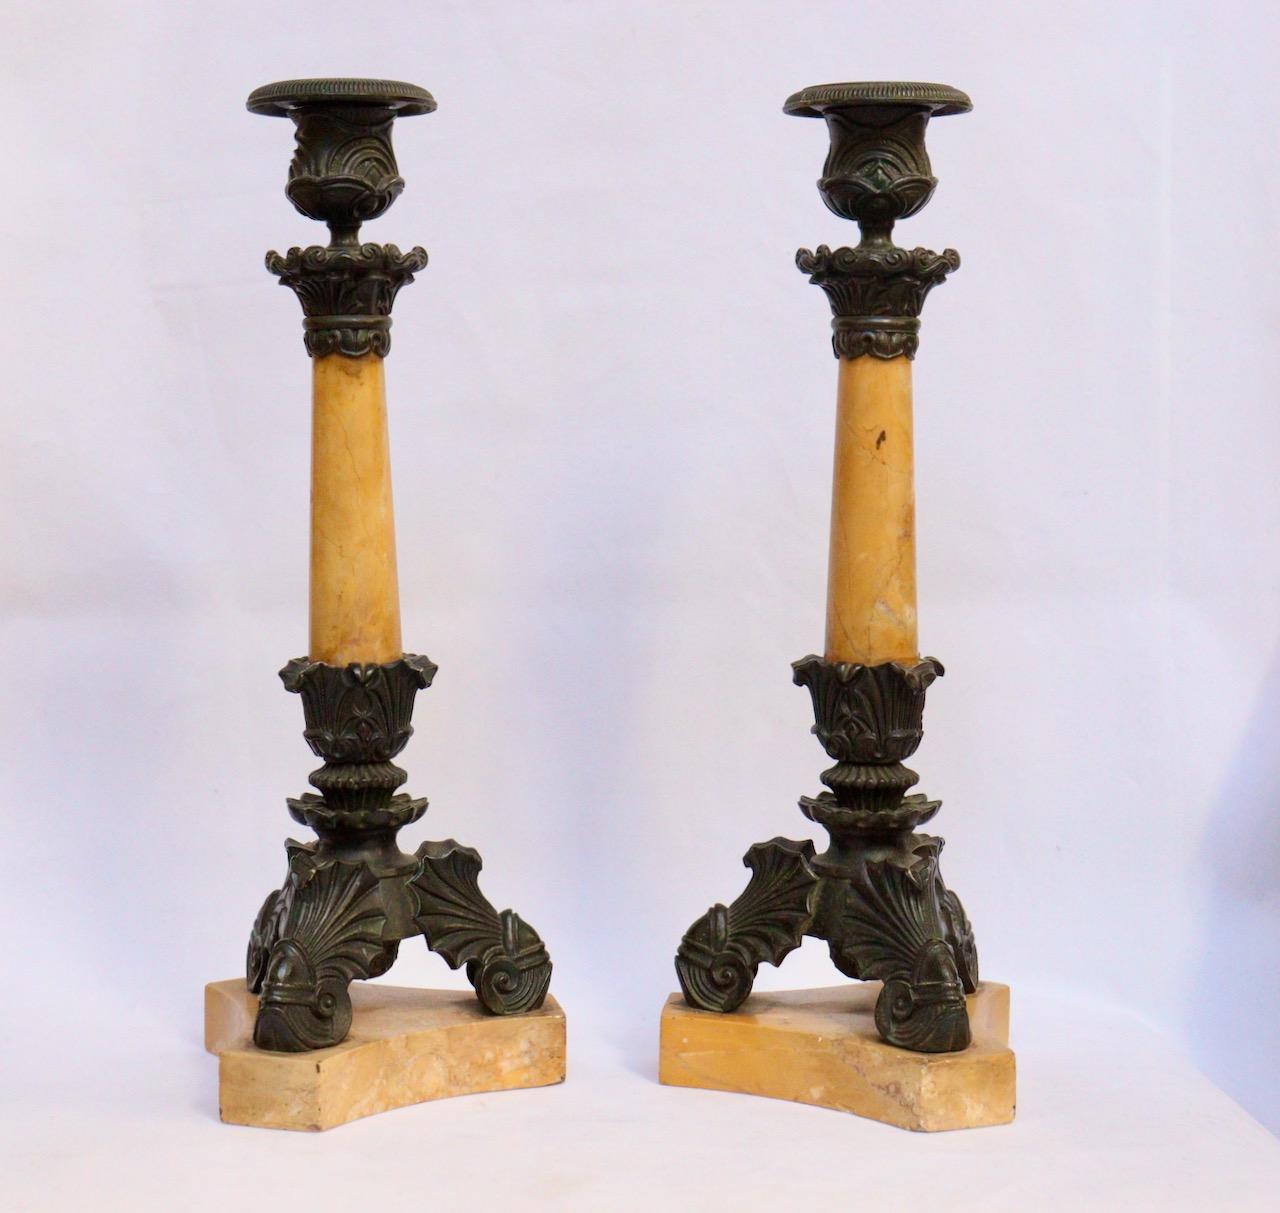 Patinated 19th Century French Empire Charles X Pair of Candlesticks